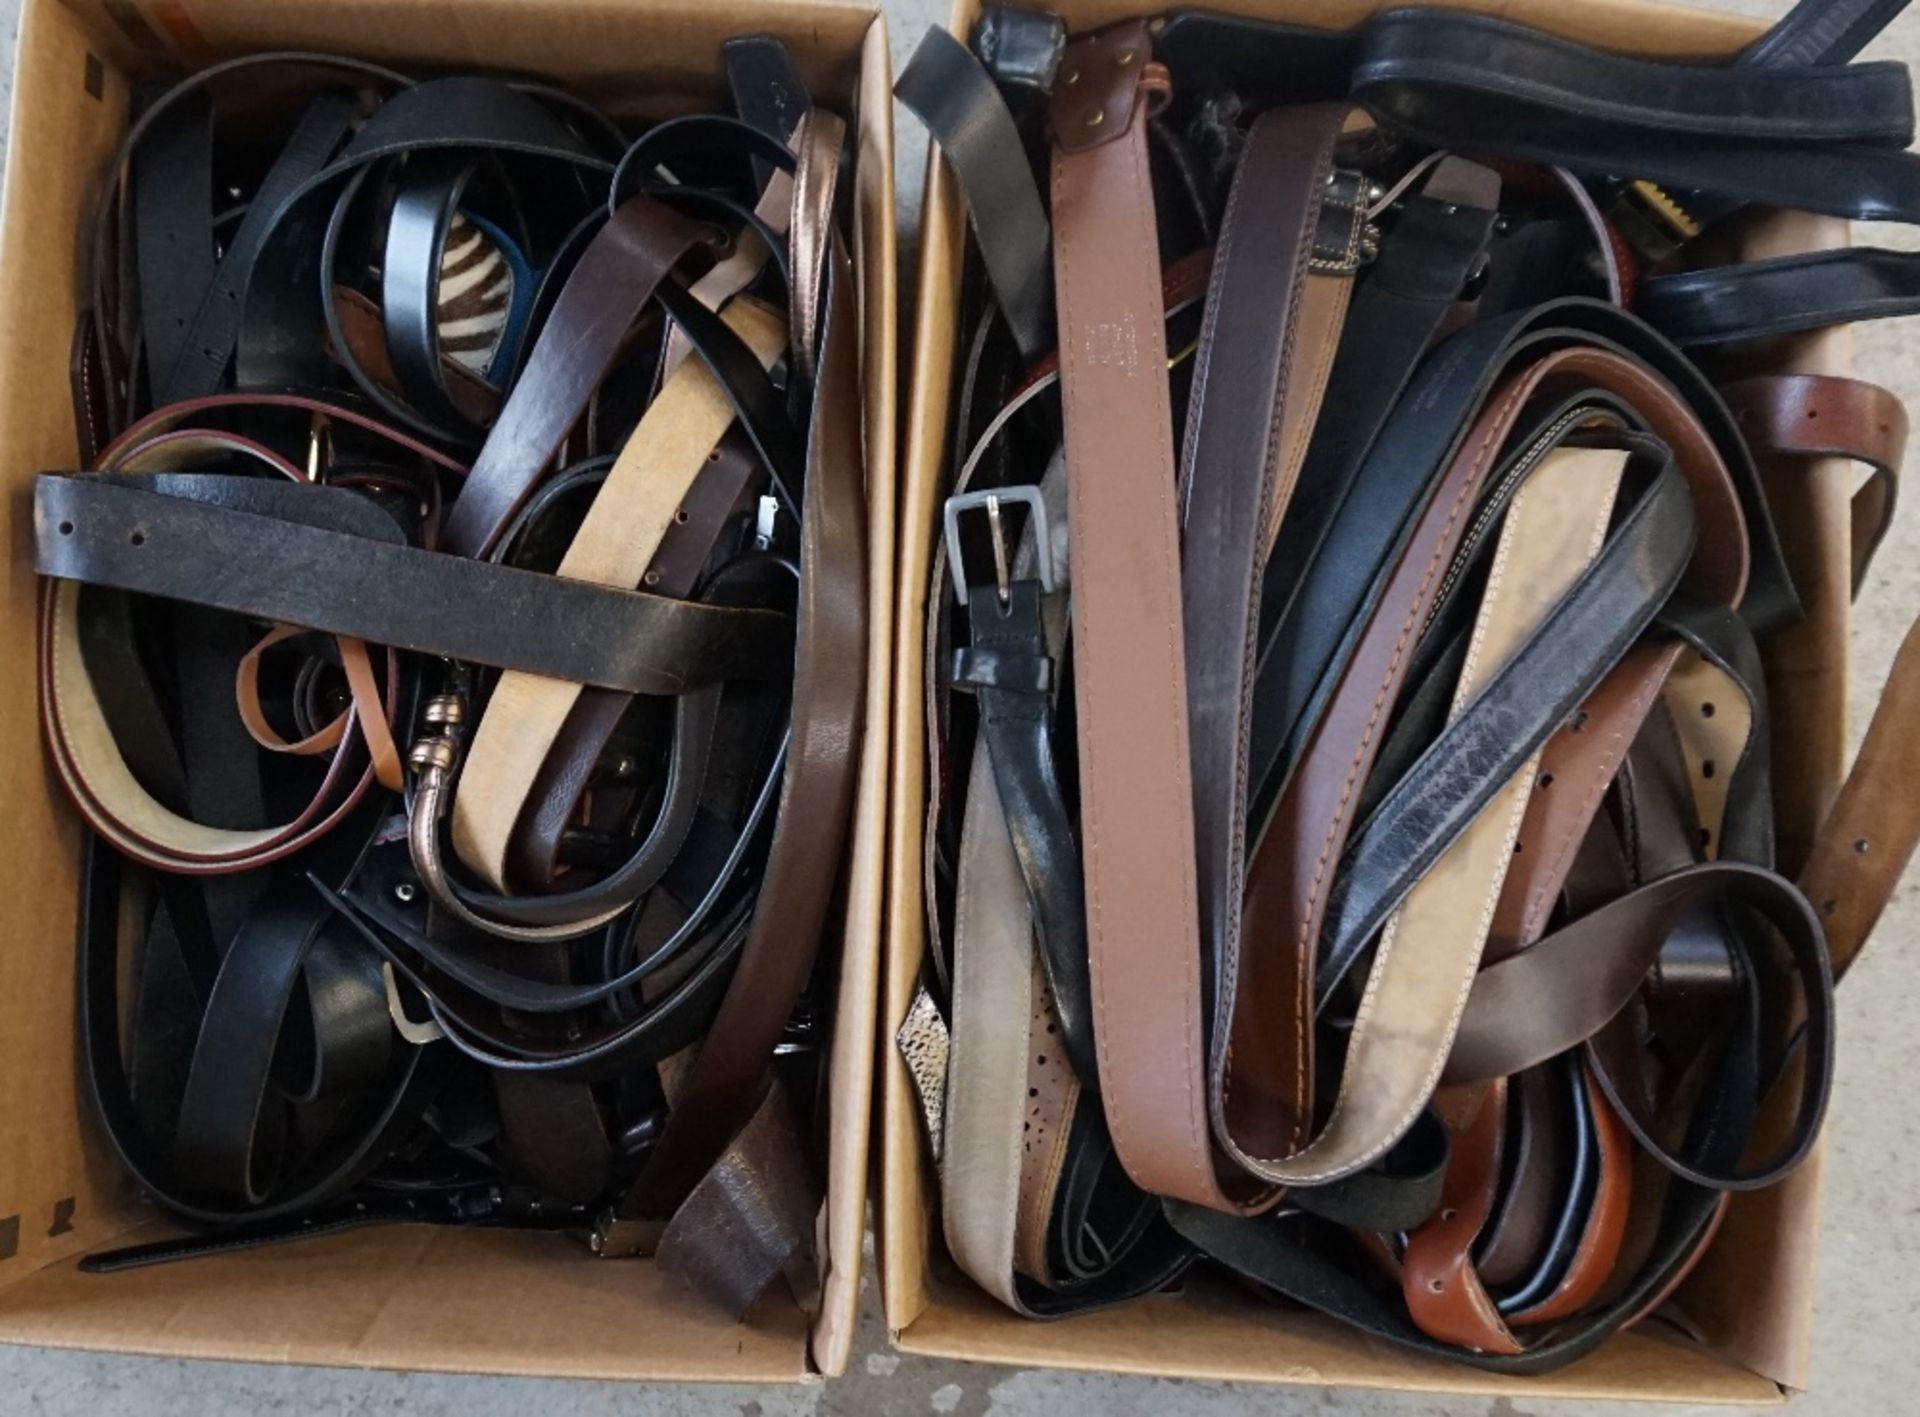 TWO BOXES OF LADIES' AND GENTS' BELTS